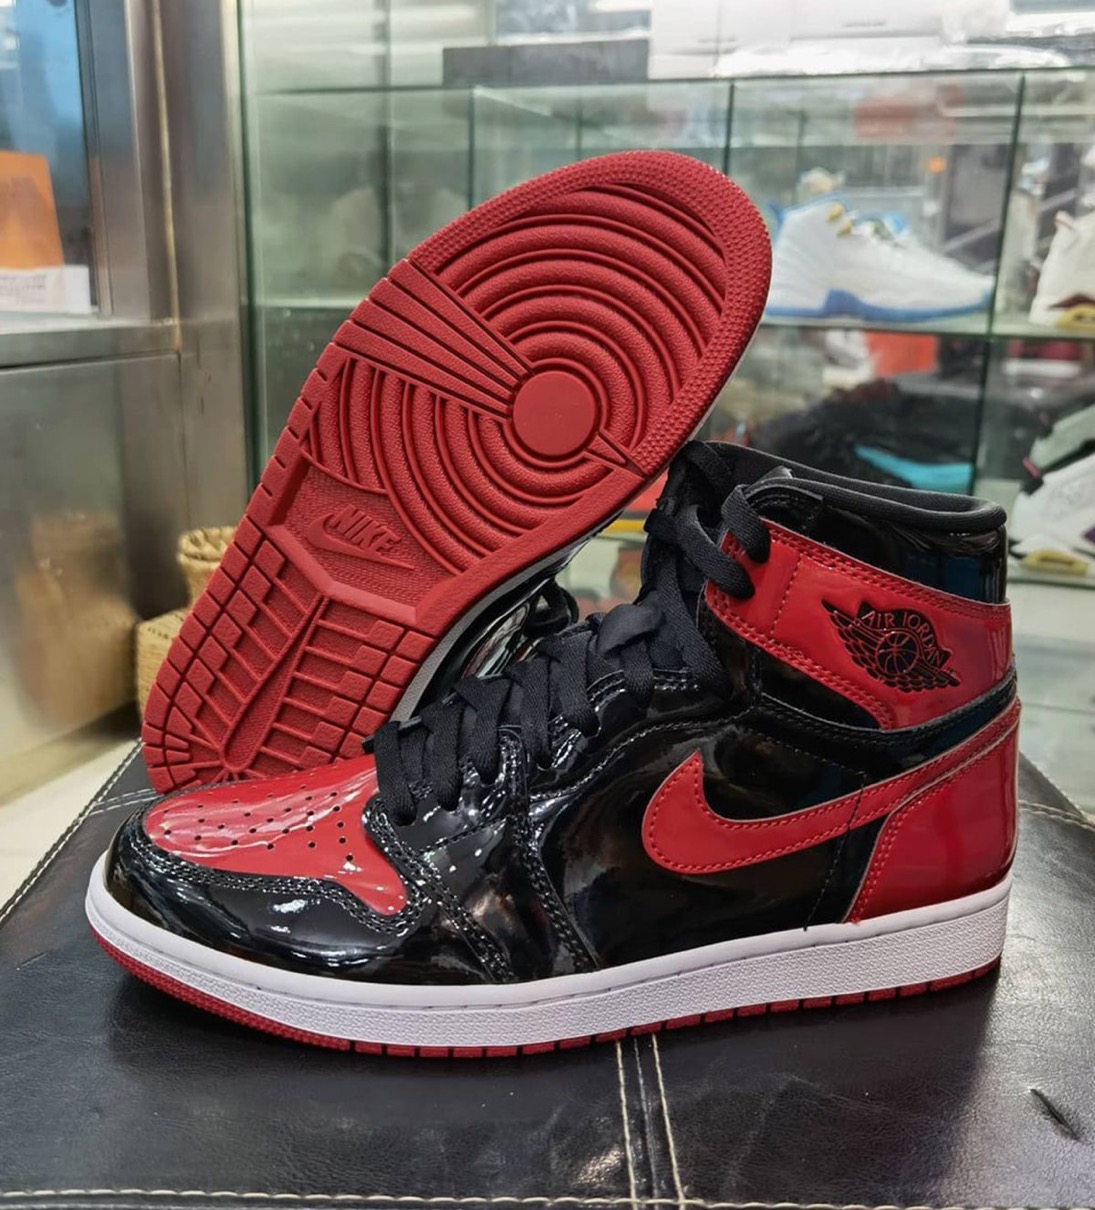 Nike】Air Jordan 1 Retro High OG “Patent Bred”が国内1月15日より発売予定 | UP TO DATE